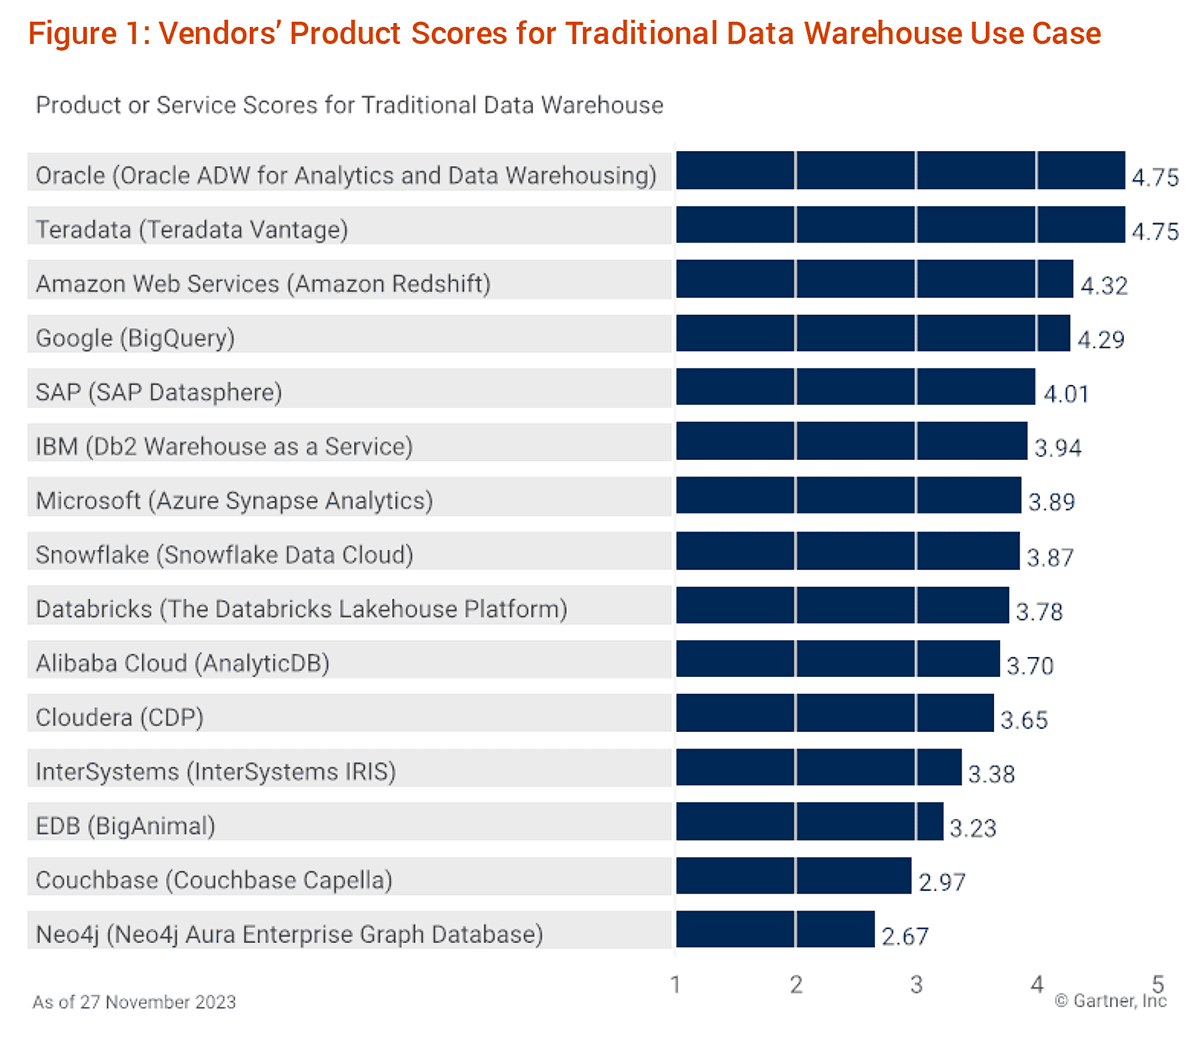 Vendors' Product Scores for Traditional Data Warehouse Use Case